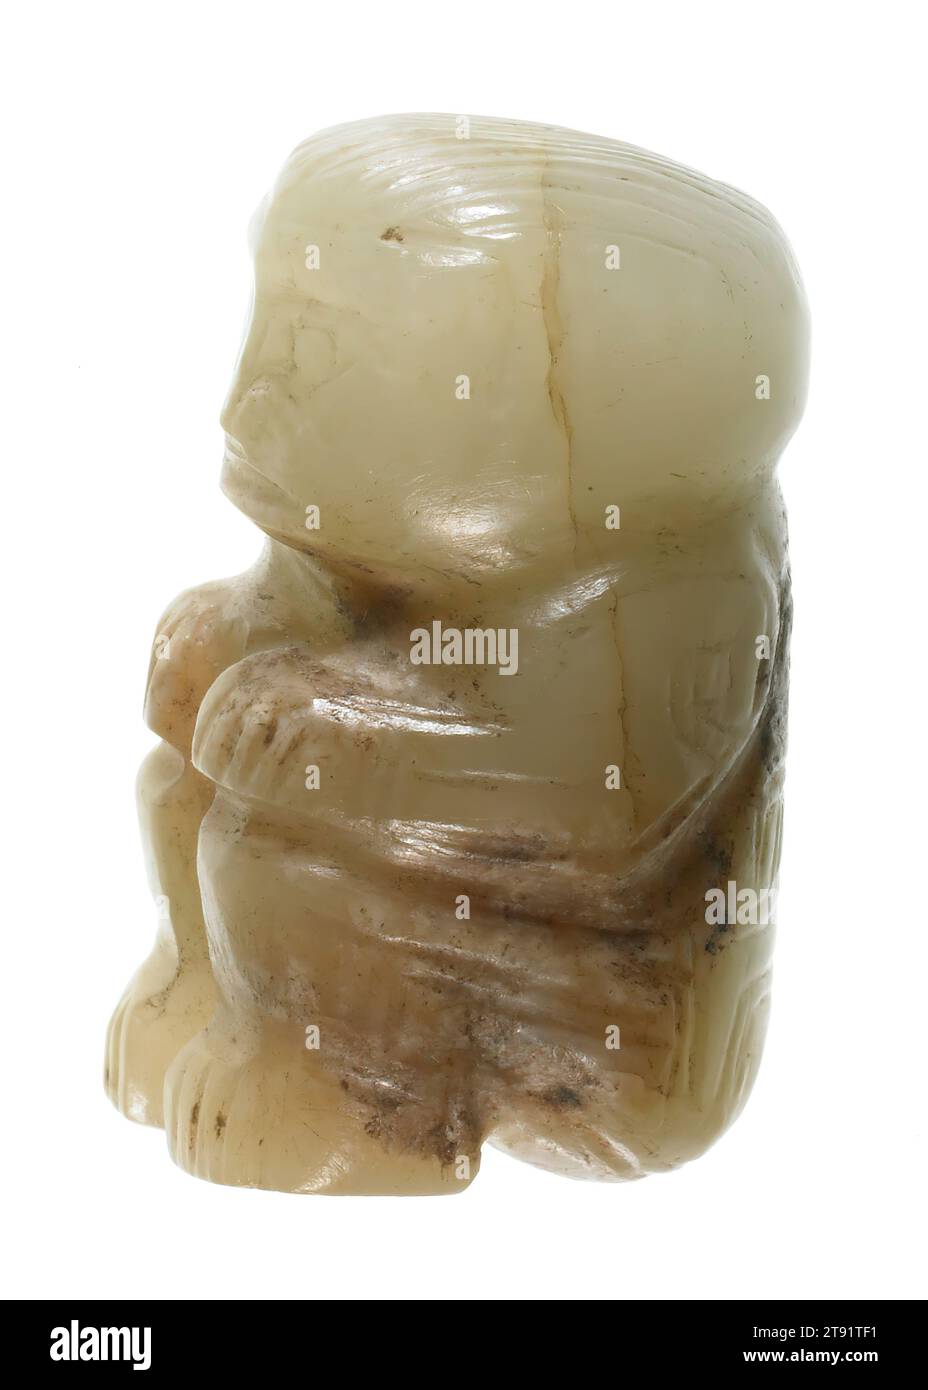 Seated Figurine Pendant, 1122-722 BCE, H.1 x W.1/2 x D.5/8 in., Translucent white jade with opaque calcification, China, 12th-8th century BCE Stock Photo